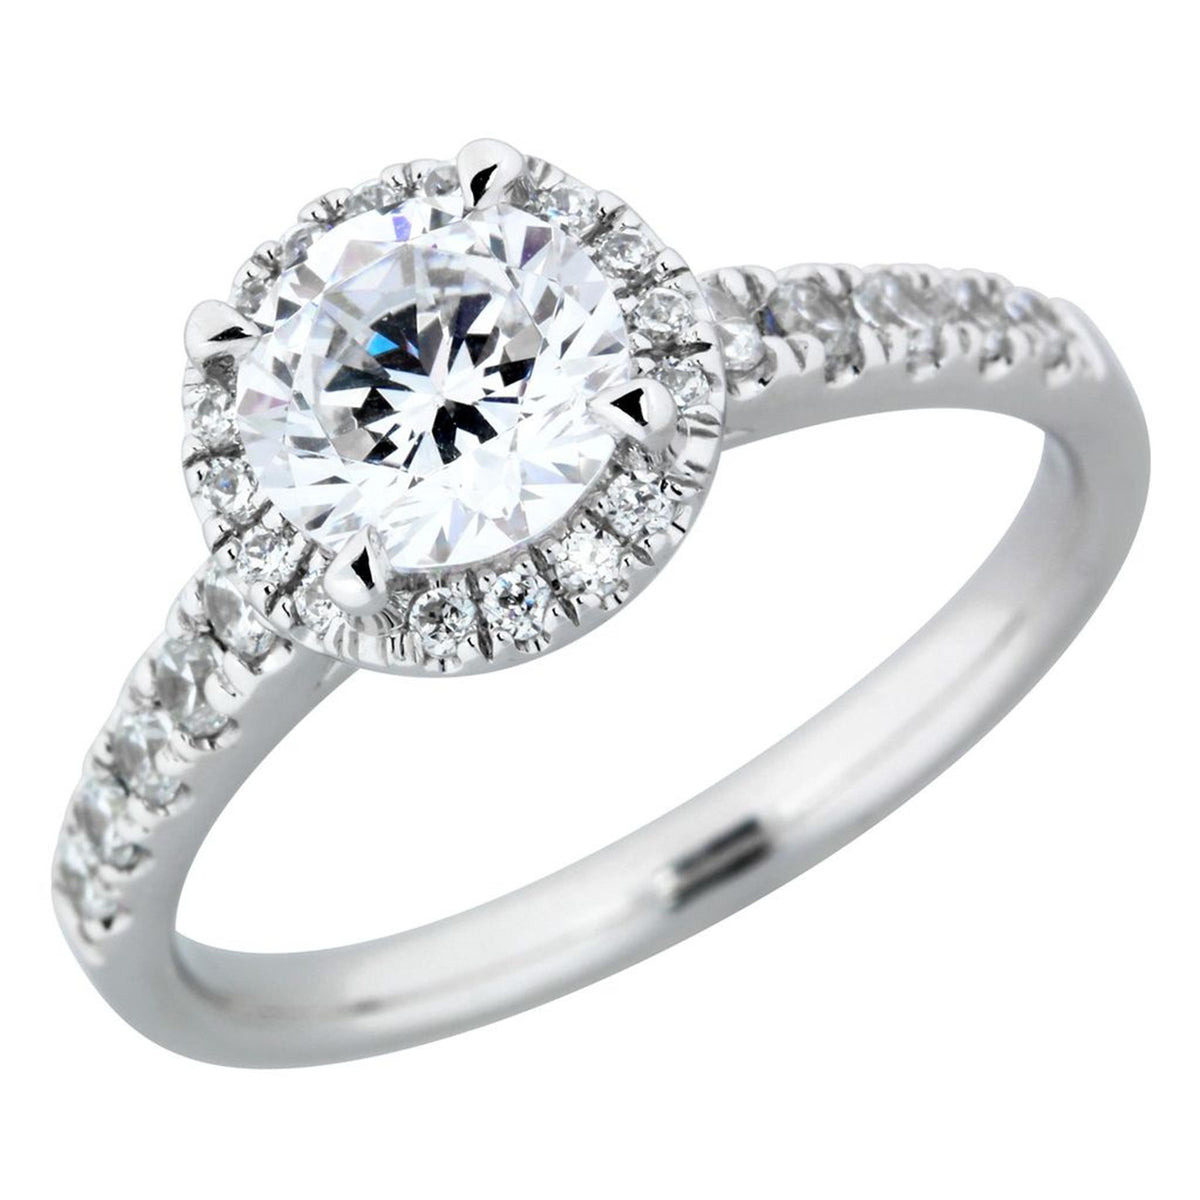 18Kt White Gold Halo Engagement Ring Mounting With 0.32cttw Natural Diamonds